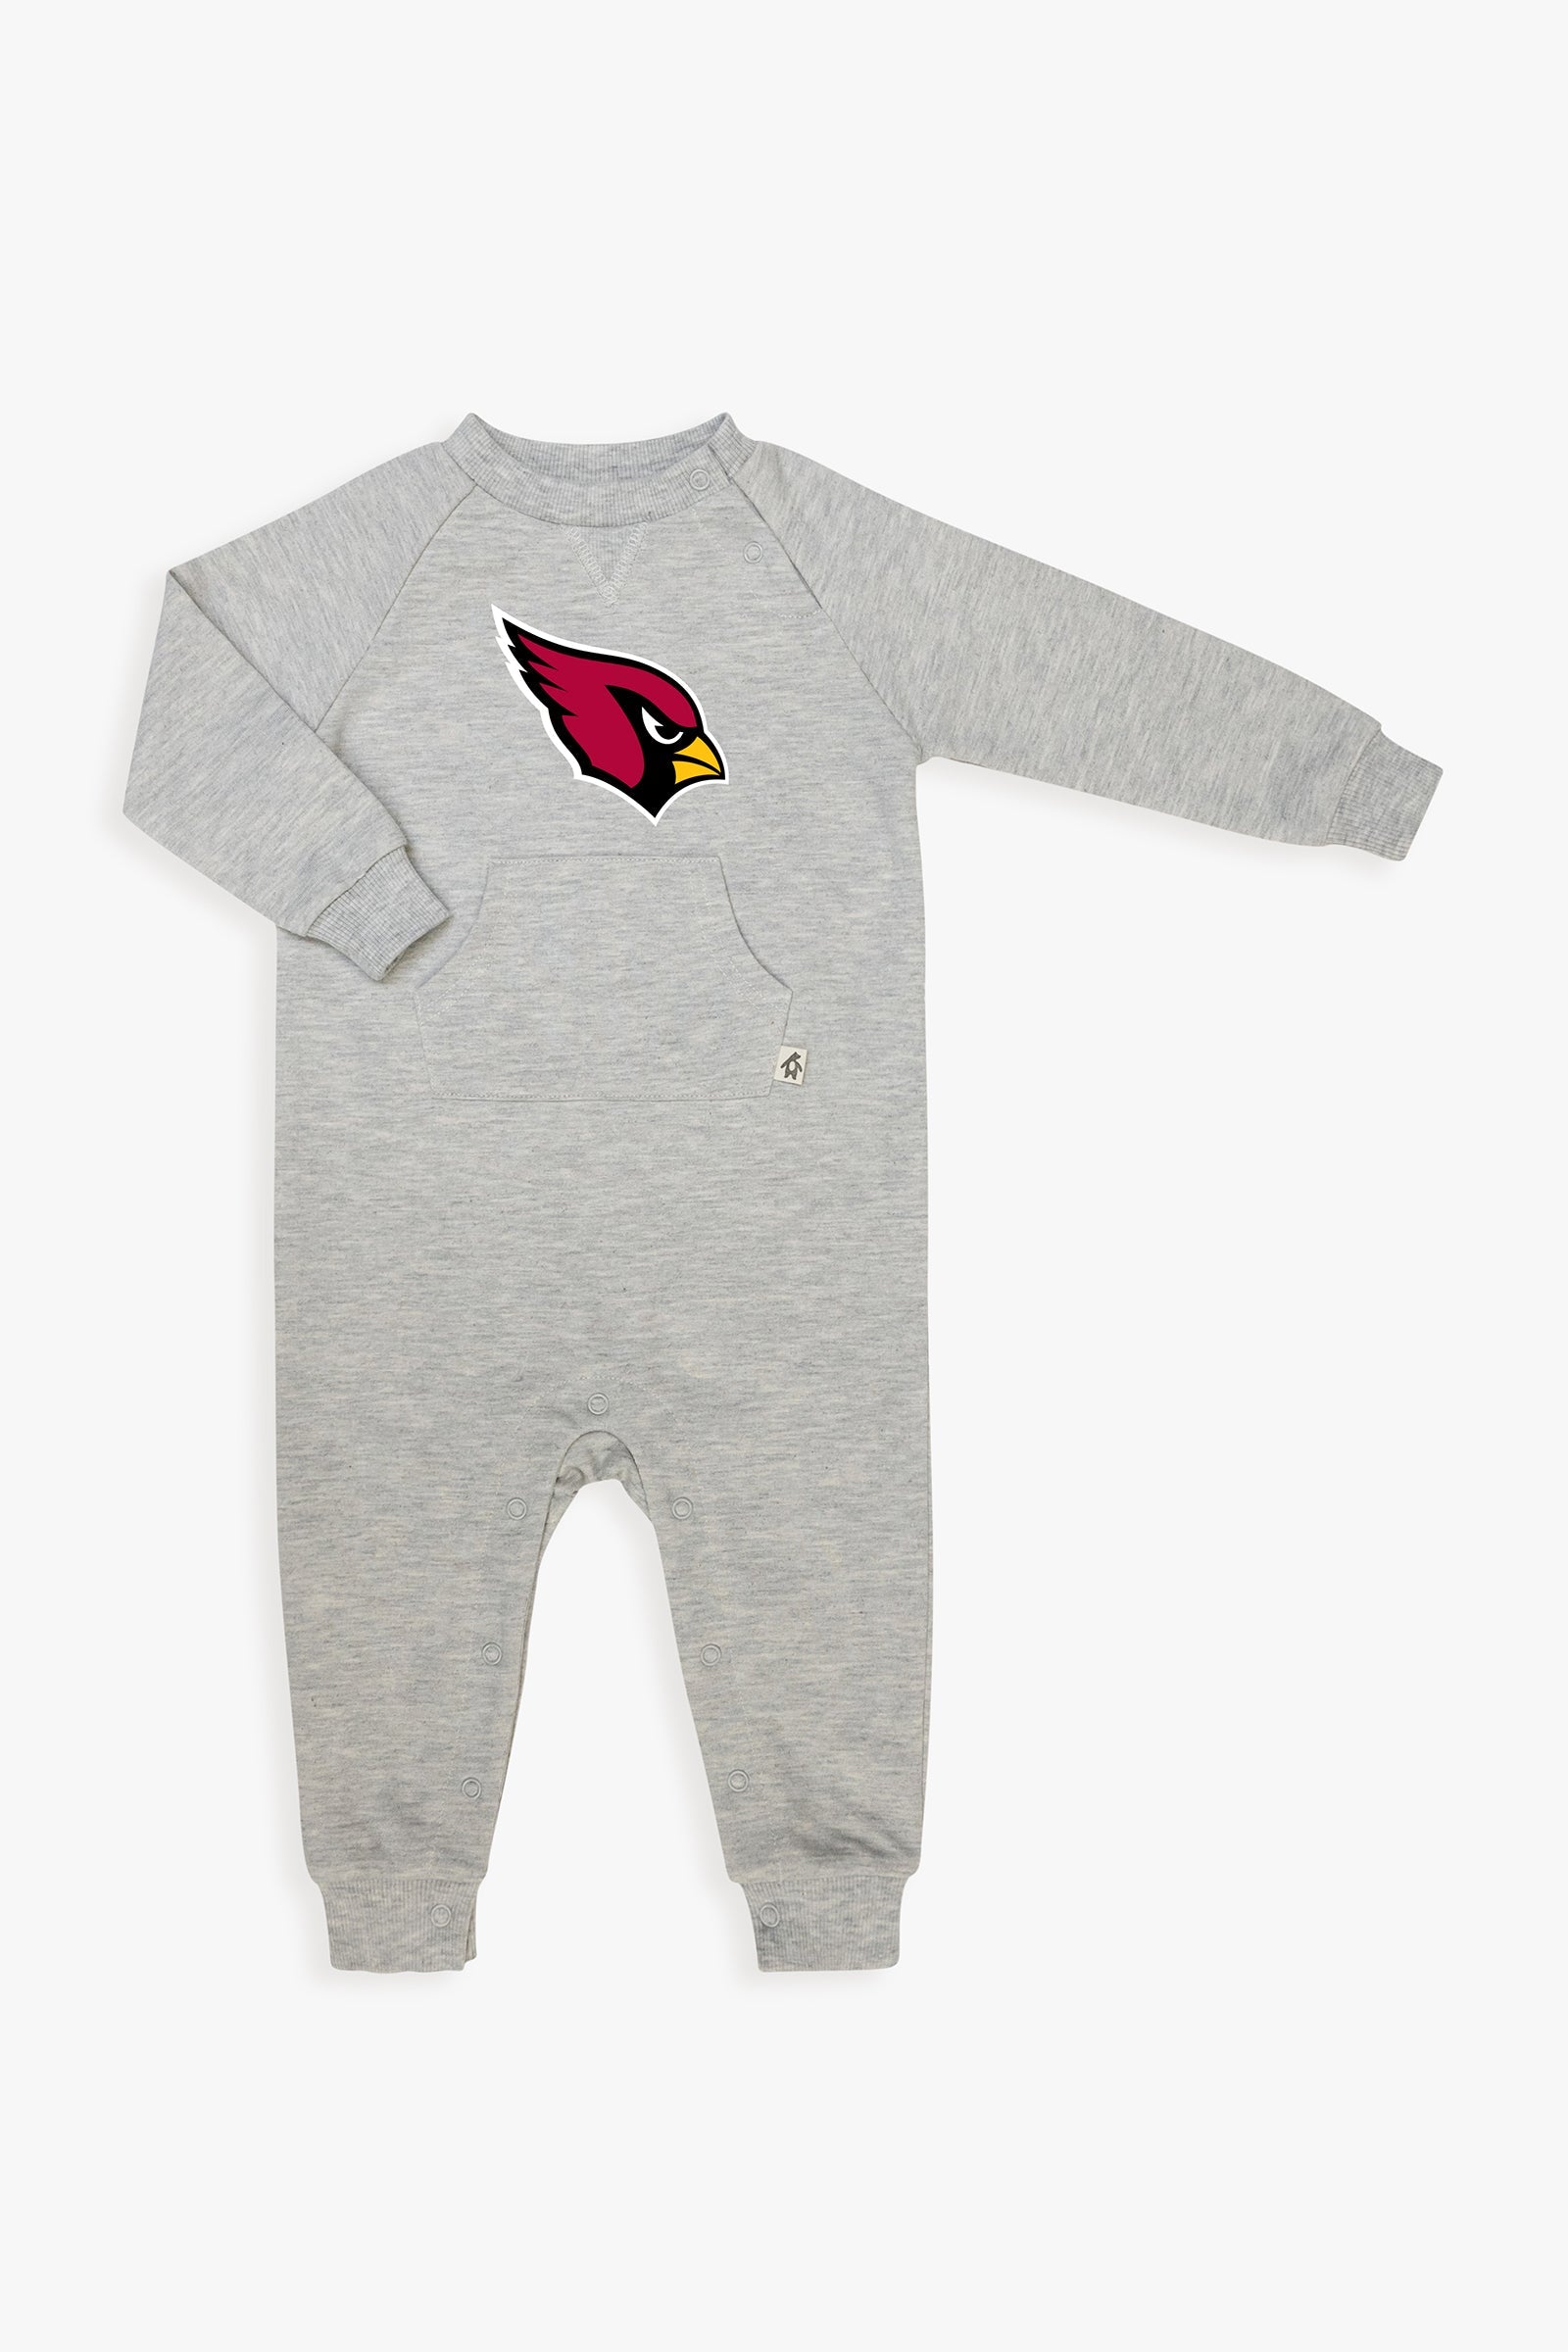 NFL Baby French Terry Jumpsuit in Grey